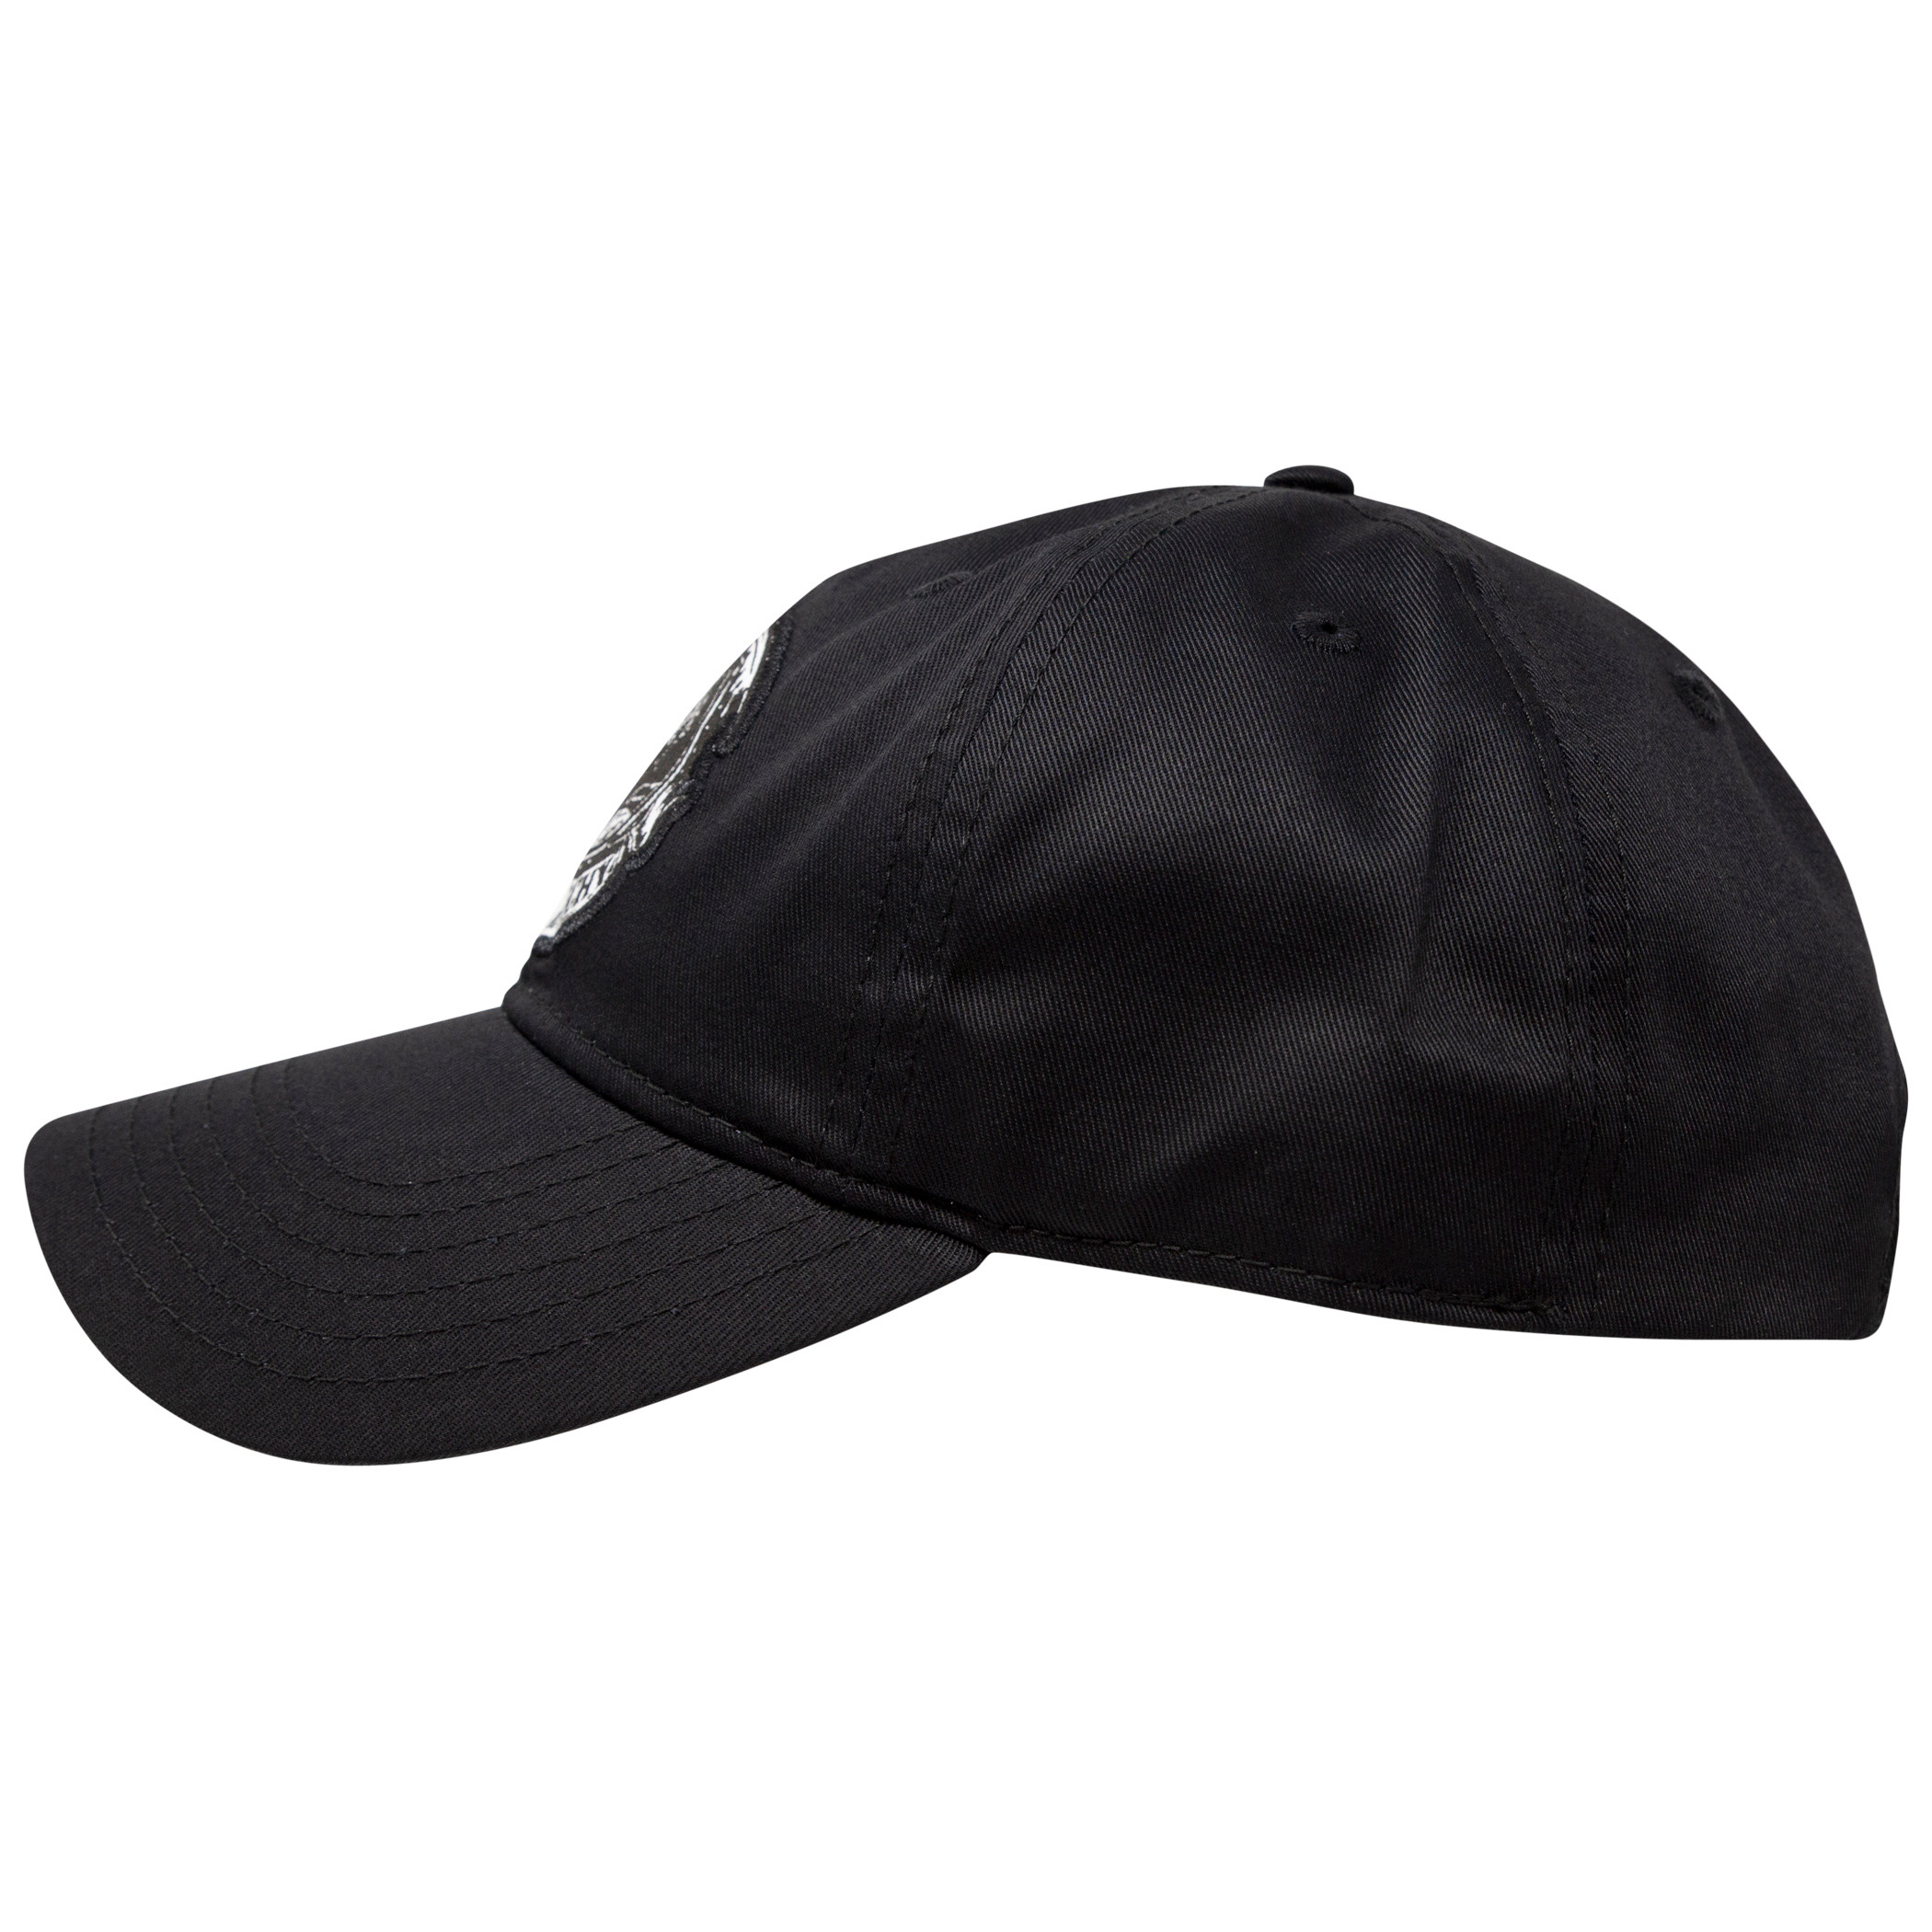 Sons Of Anarchy Reaper Adjustable Hat